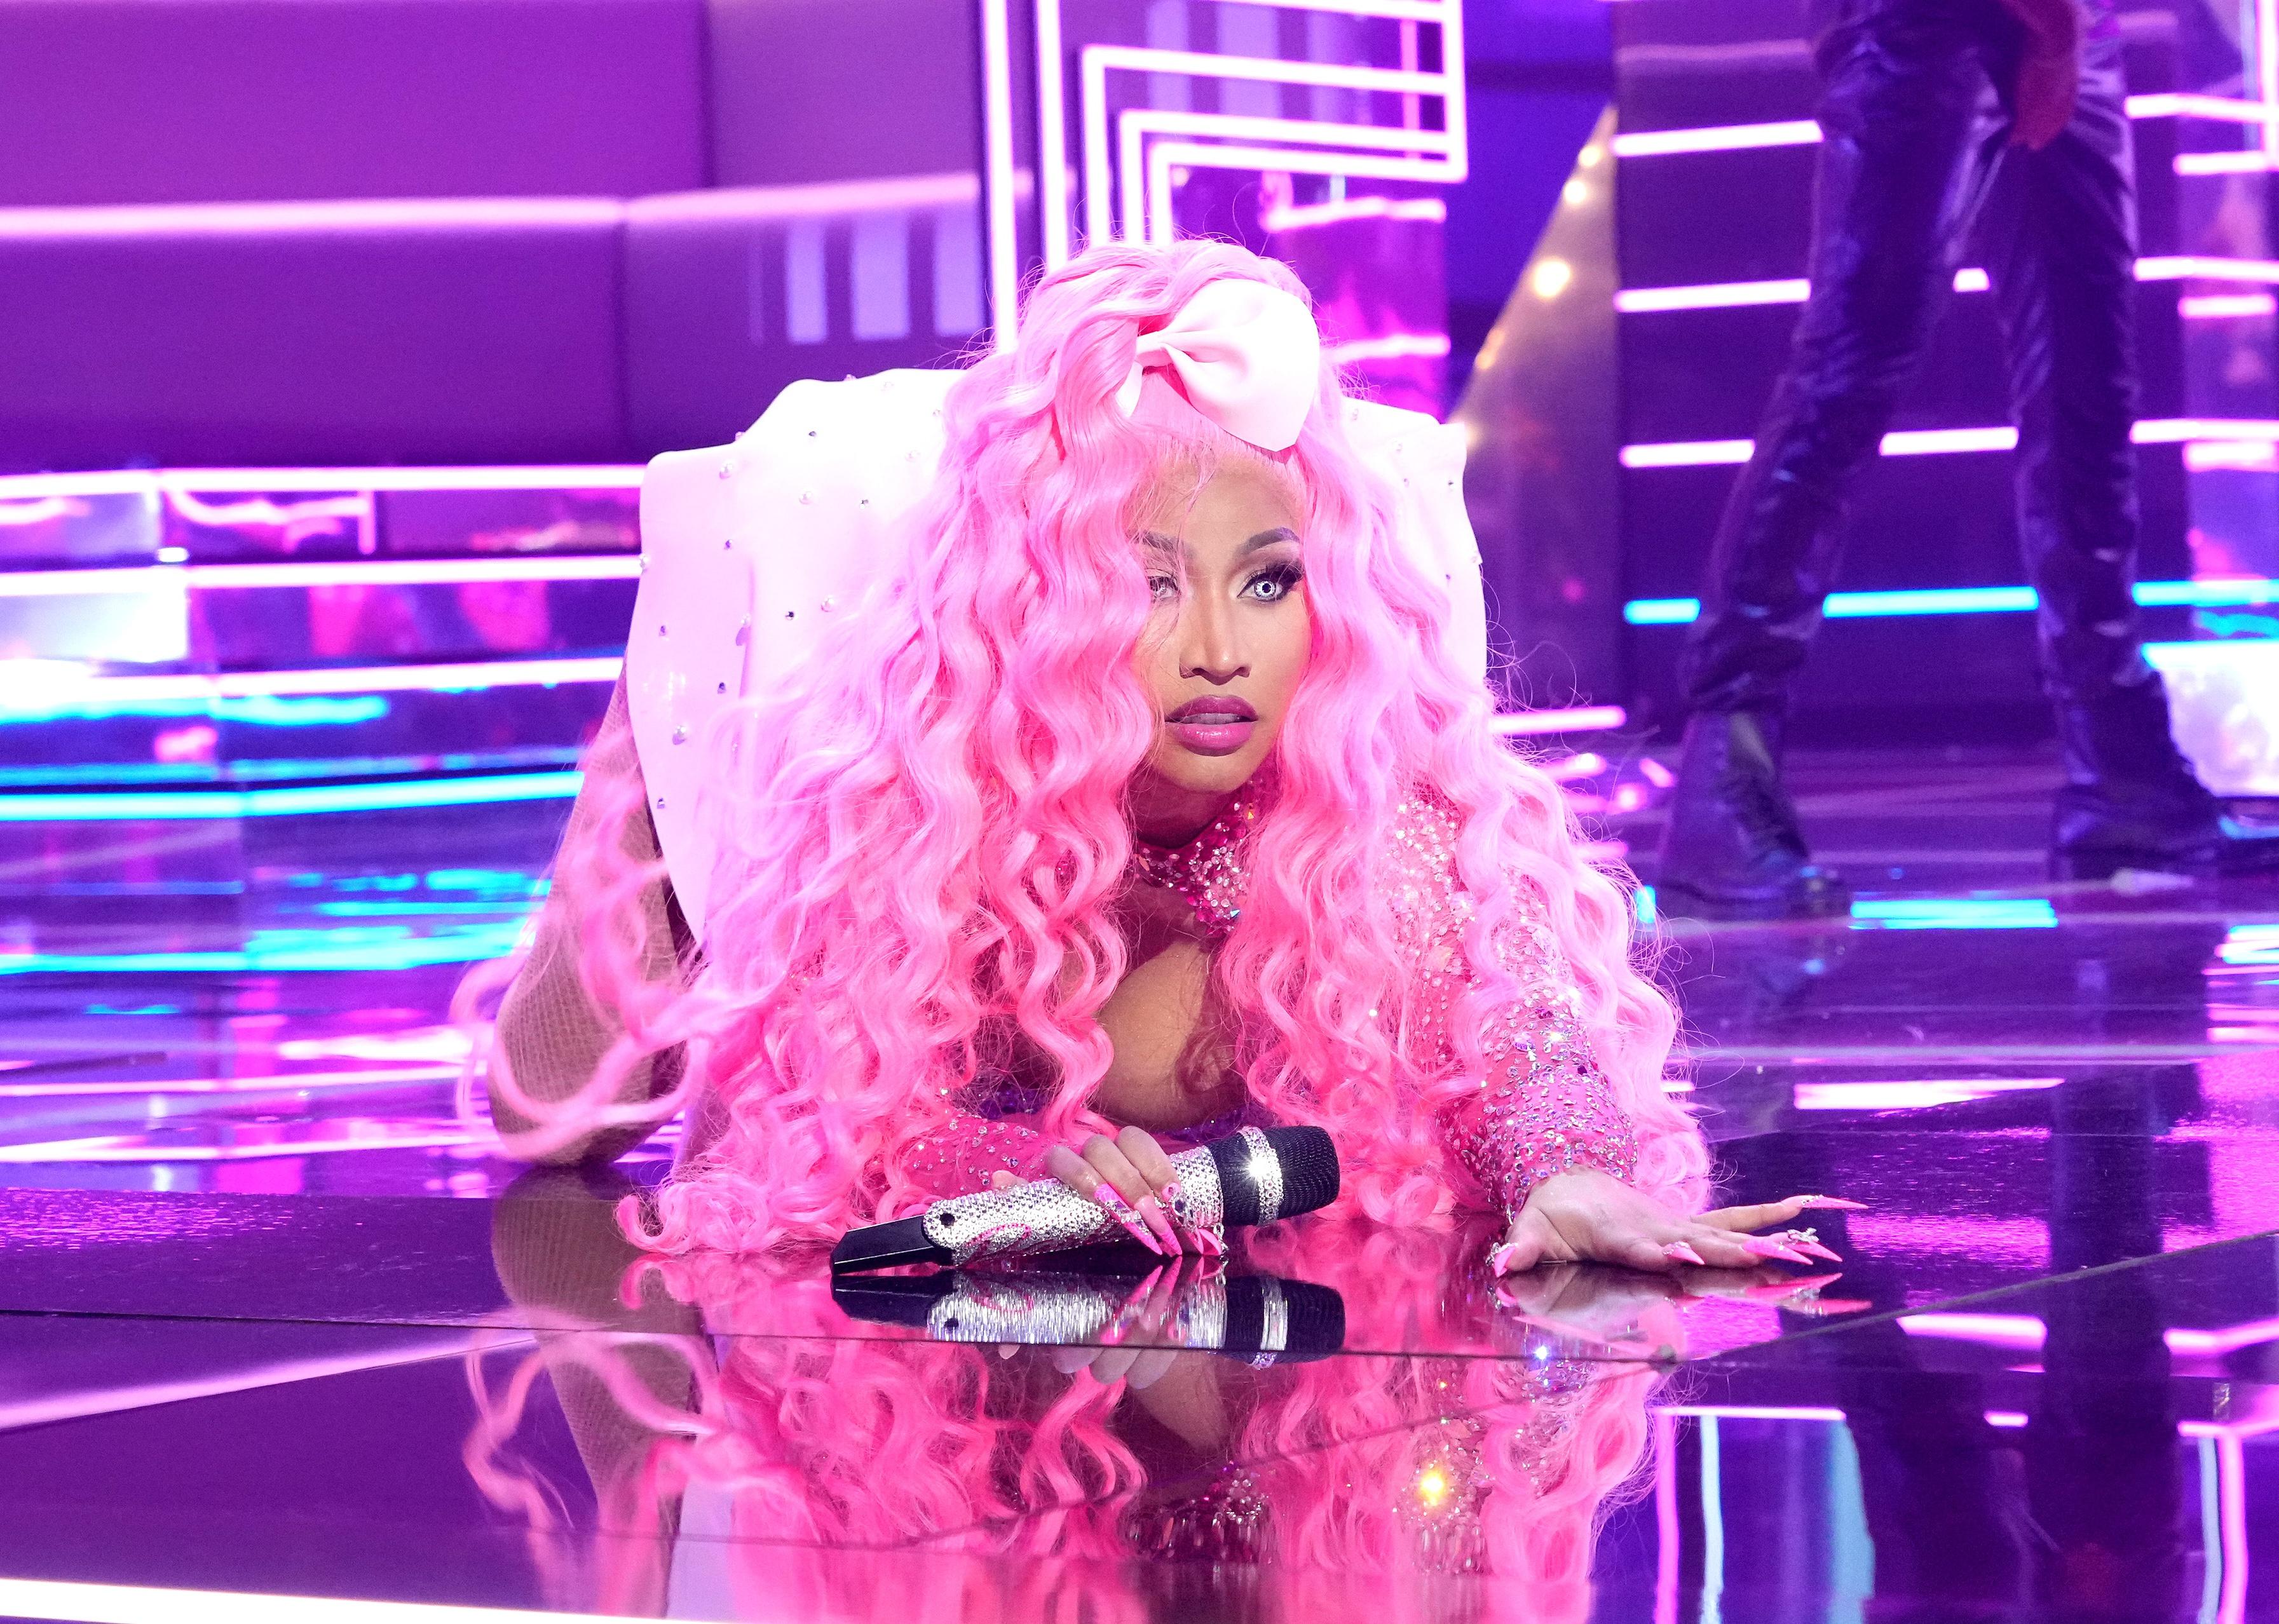 Nicki Minaj in all pink from head to toe on the floor of the stage.